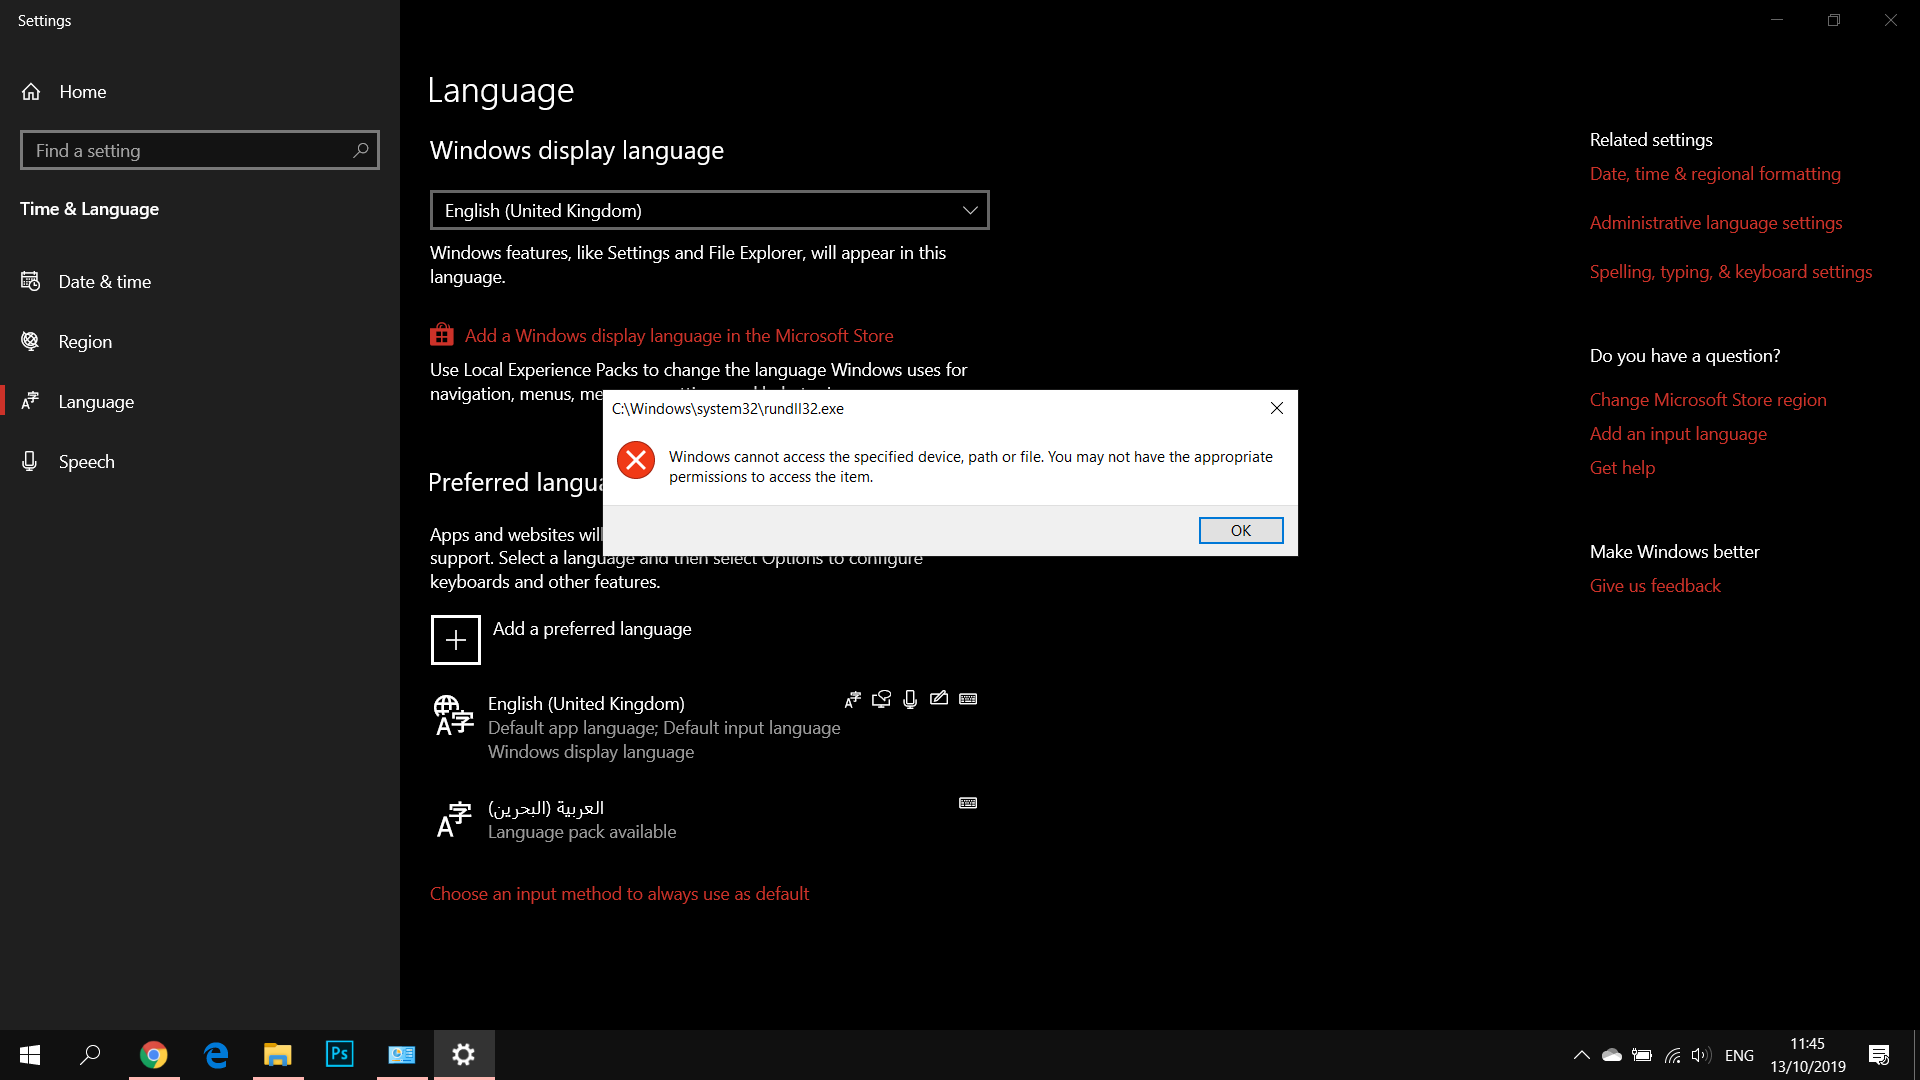 There is no language option in the control panel in windows 10 1903 update 3e87ac2a-7d89-4a3b-9129-ccfabd1c2756?upload=true.png